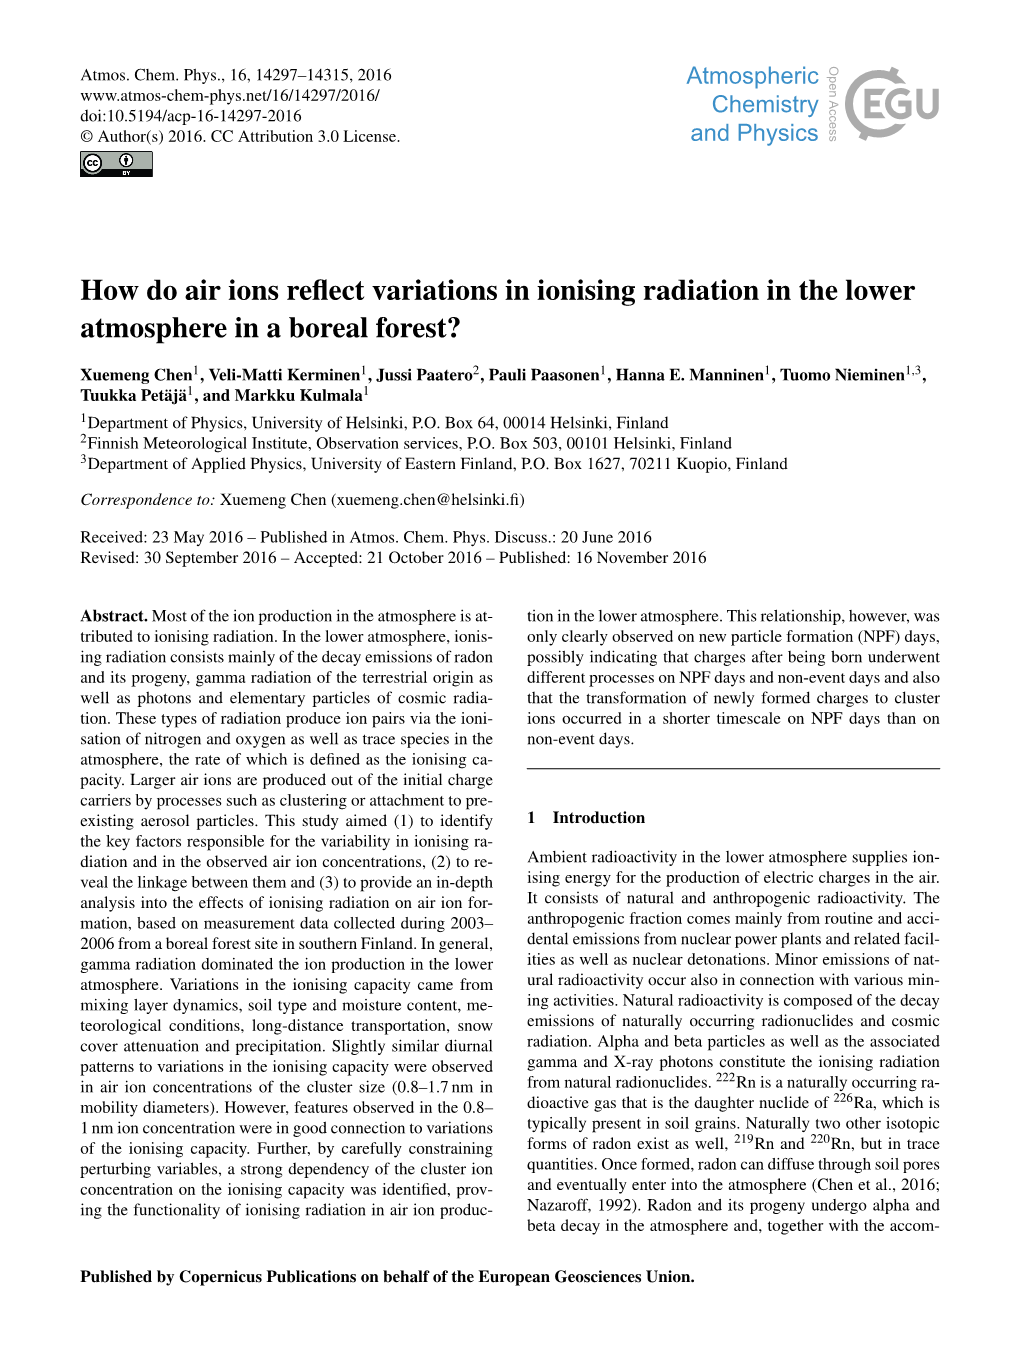 How Do Air Ions Reflect Variations in Ionising Radiation in the Lower